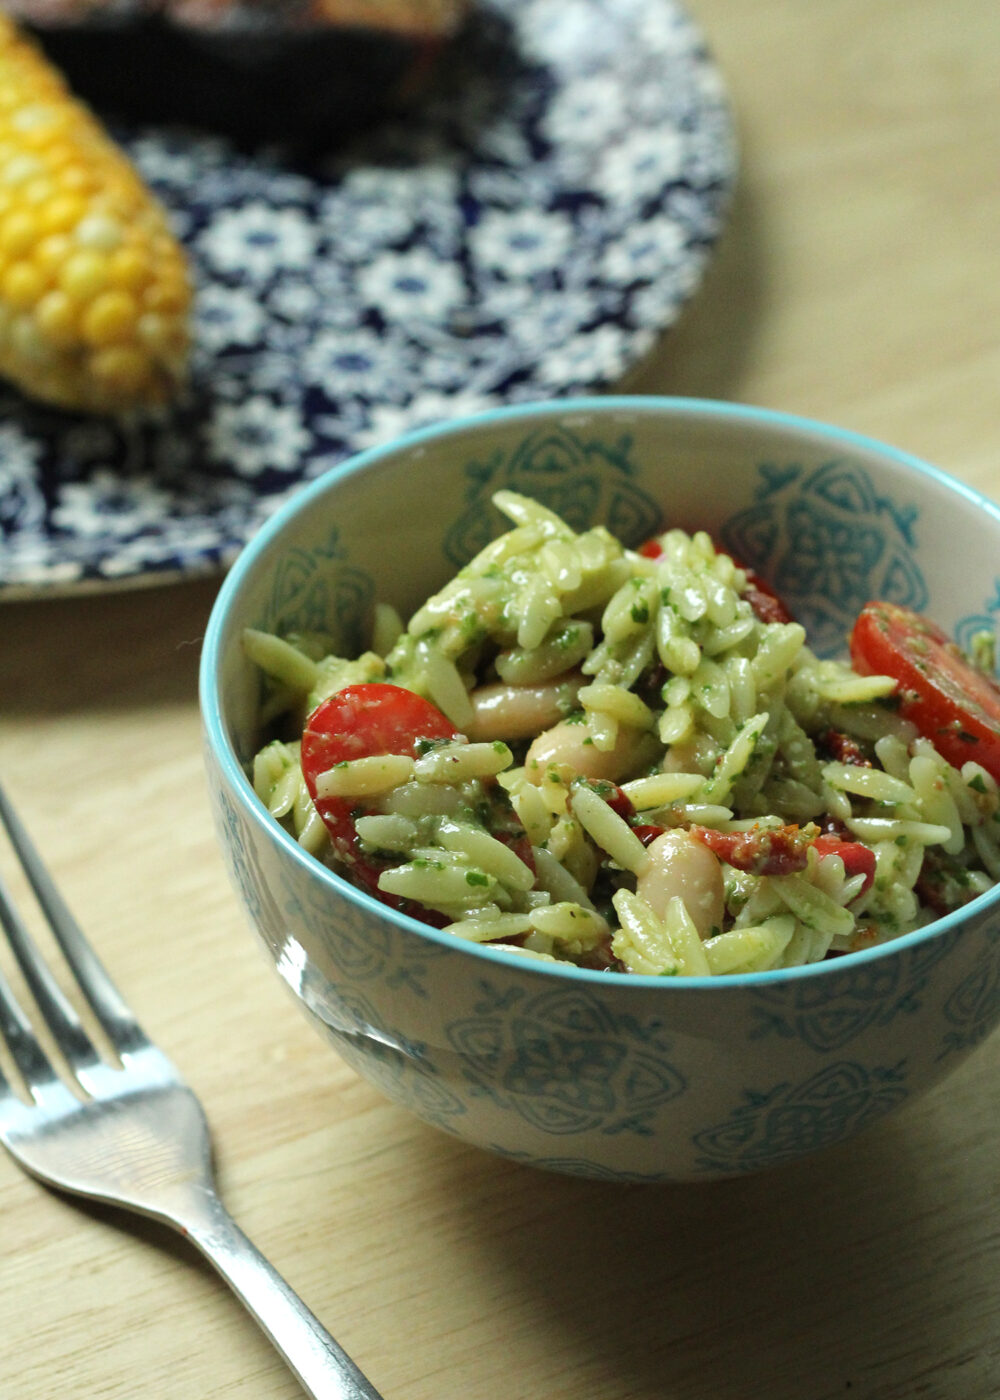 A light blue and white patterned bowl holds oblong orzo, red tomatoes, and creamy colored beans with a green flecked sauce. In the background is a blue and white flowered plate with an ear of corn.